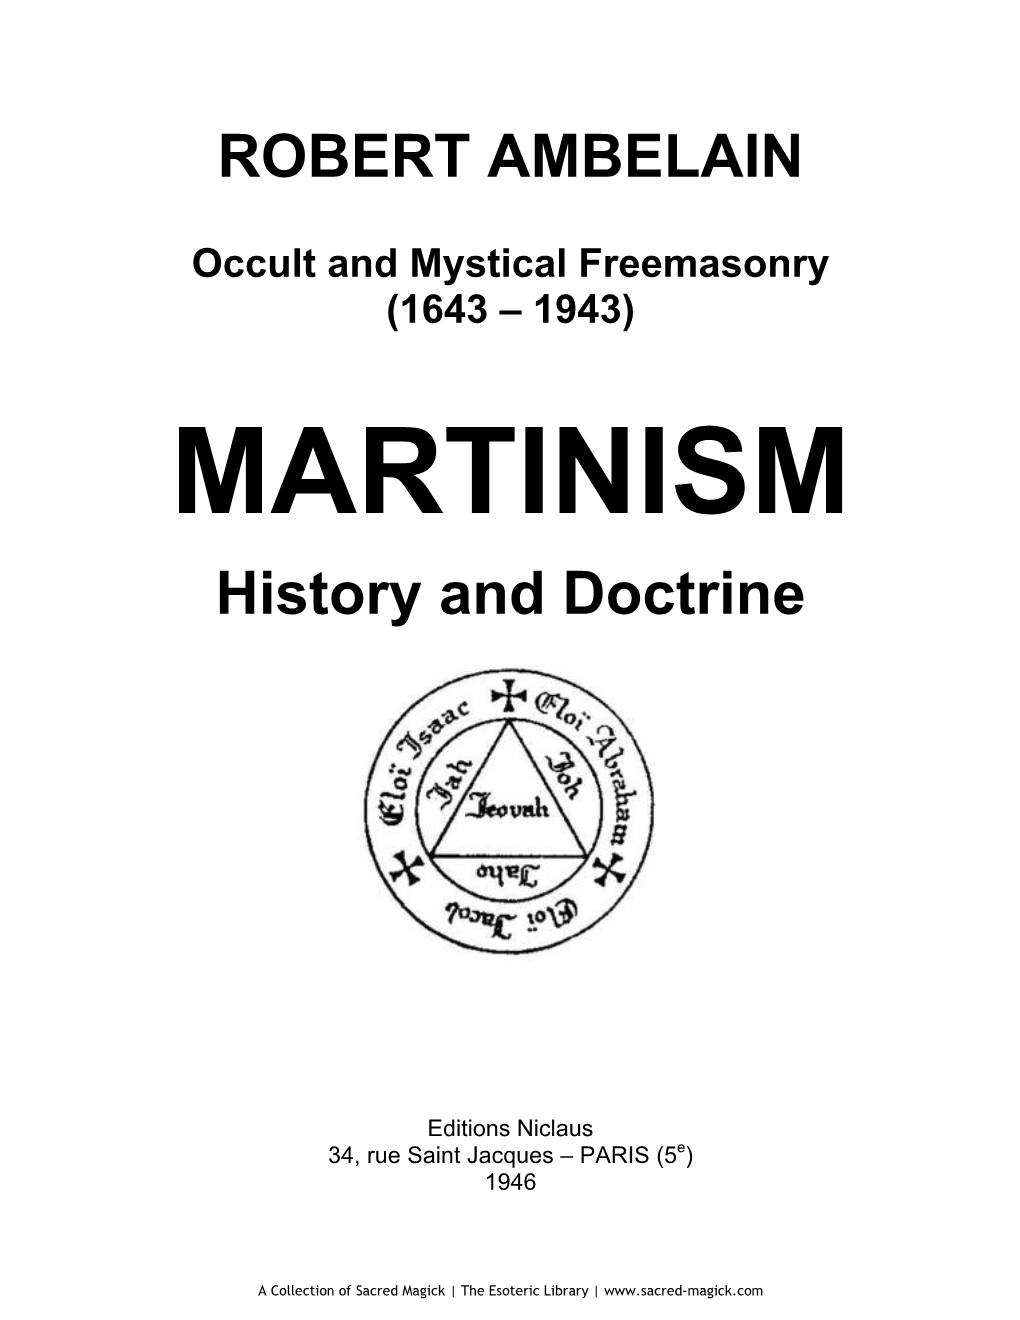 Le Martinisme Or Martinism